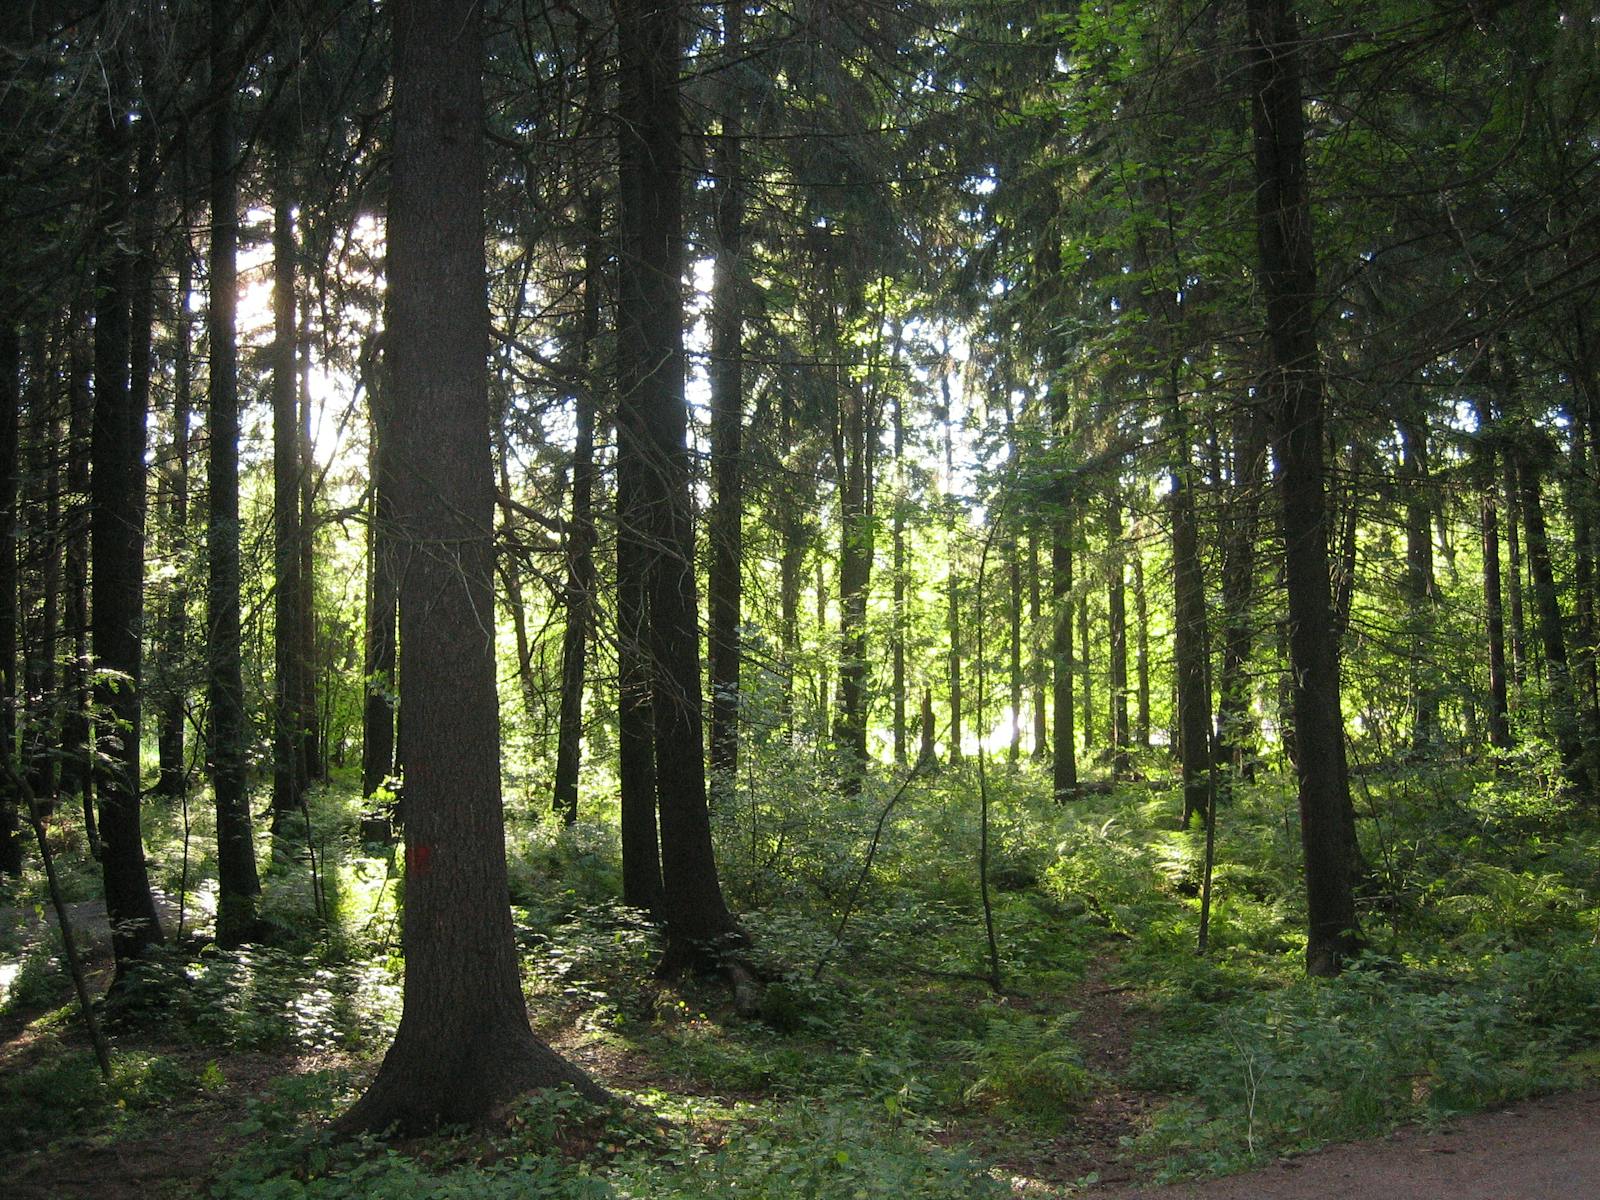 Sarmatic Mixed Forests